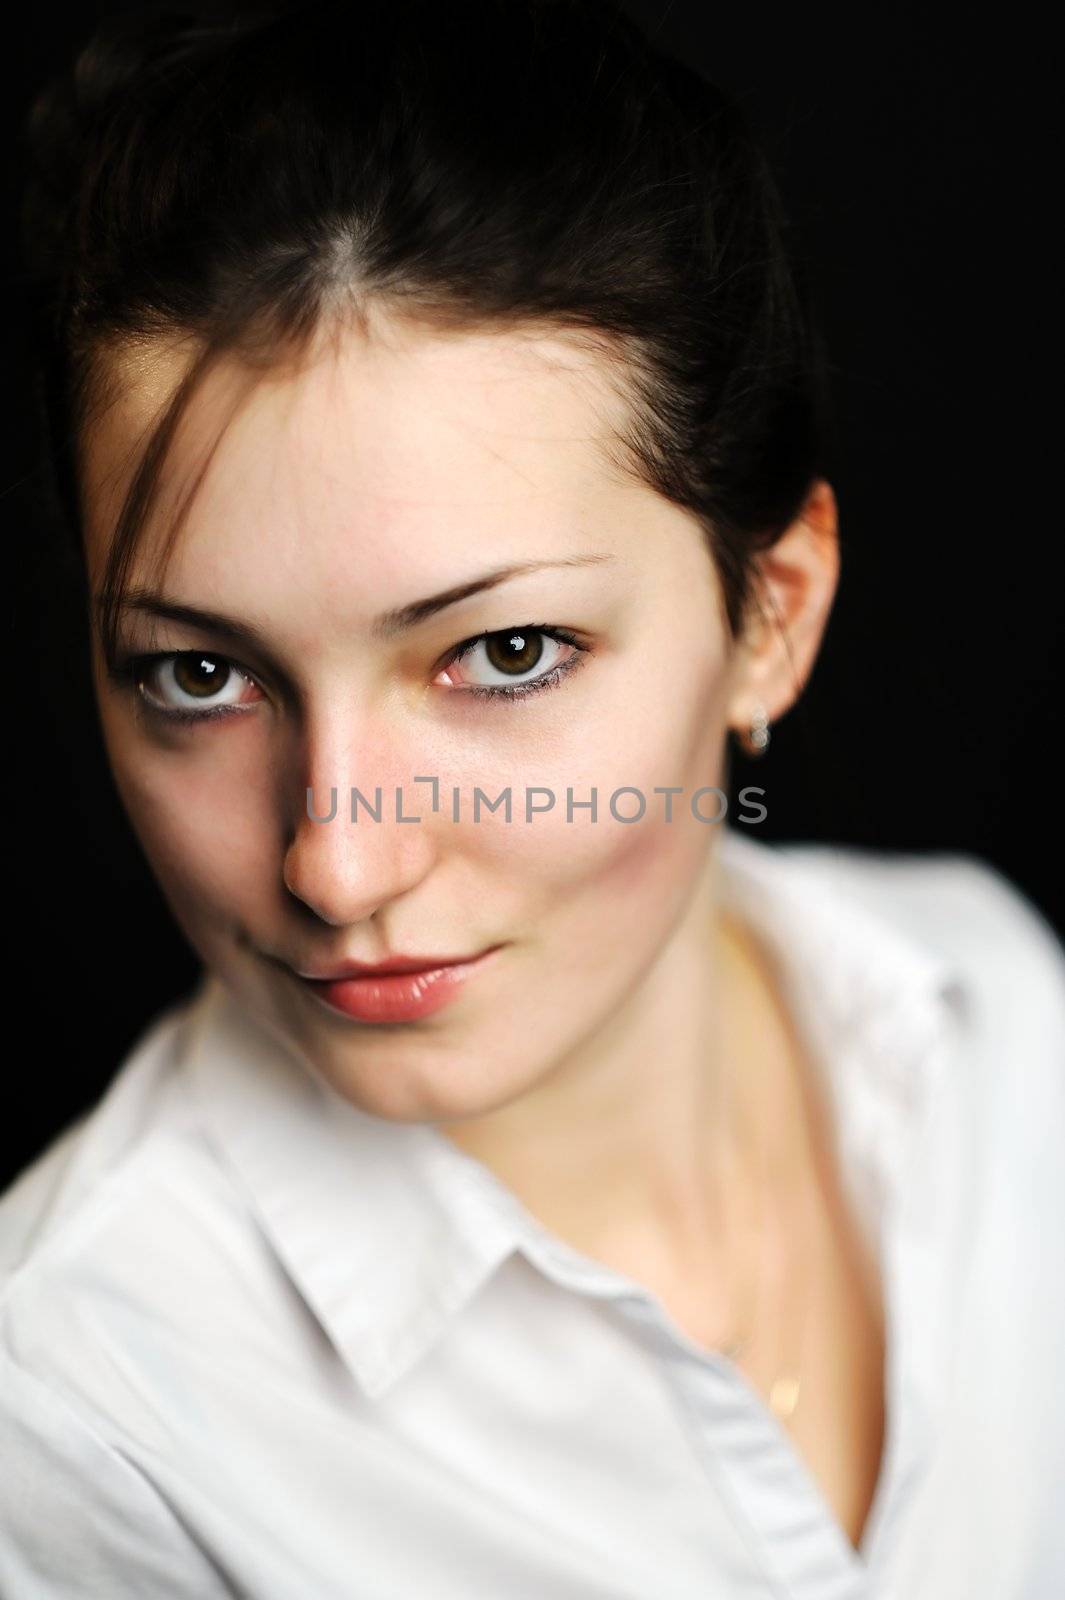 An image of a portrait of a beautiful young woman